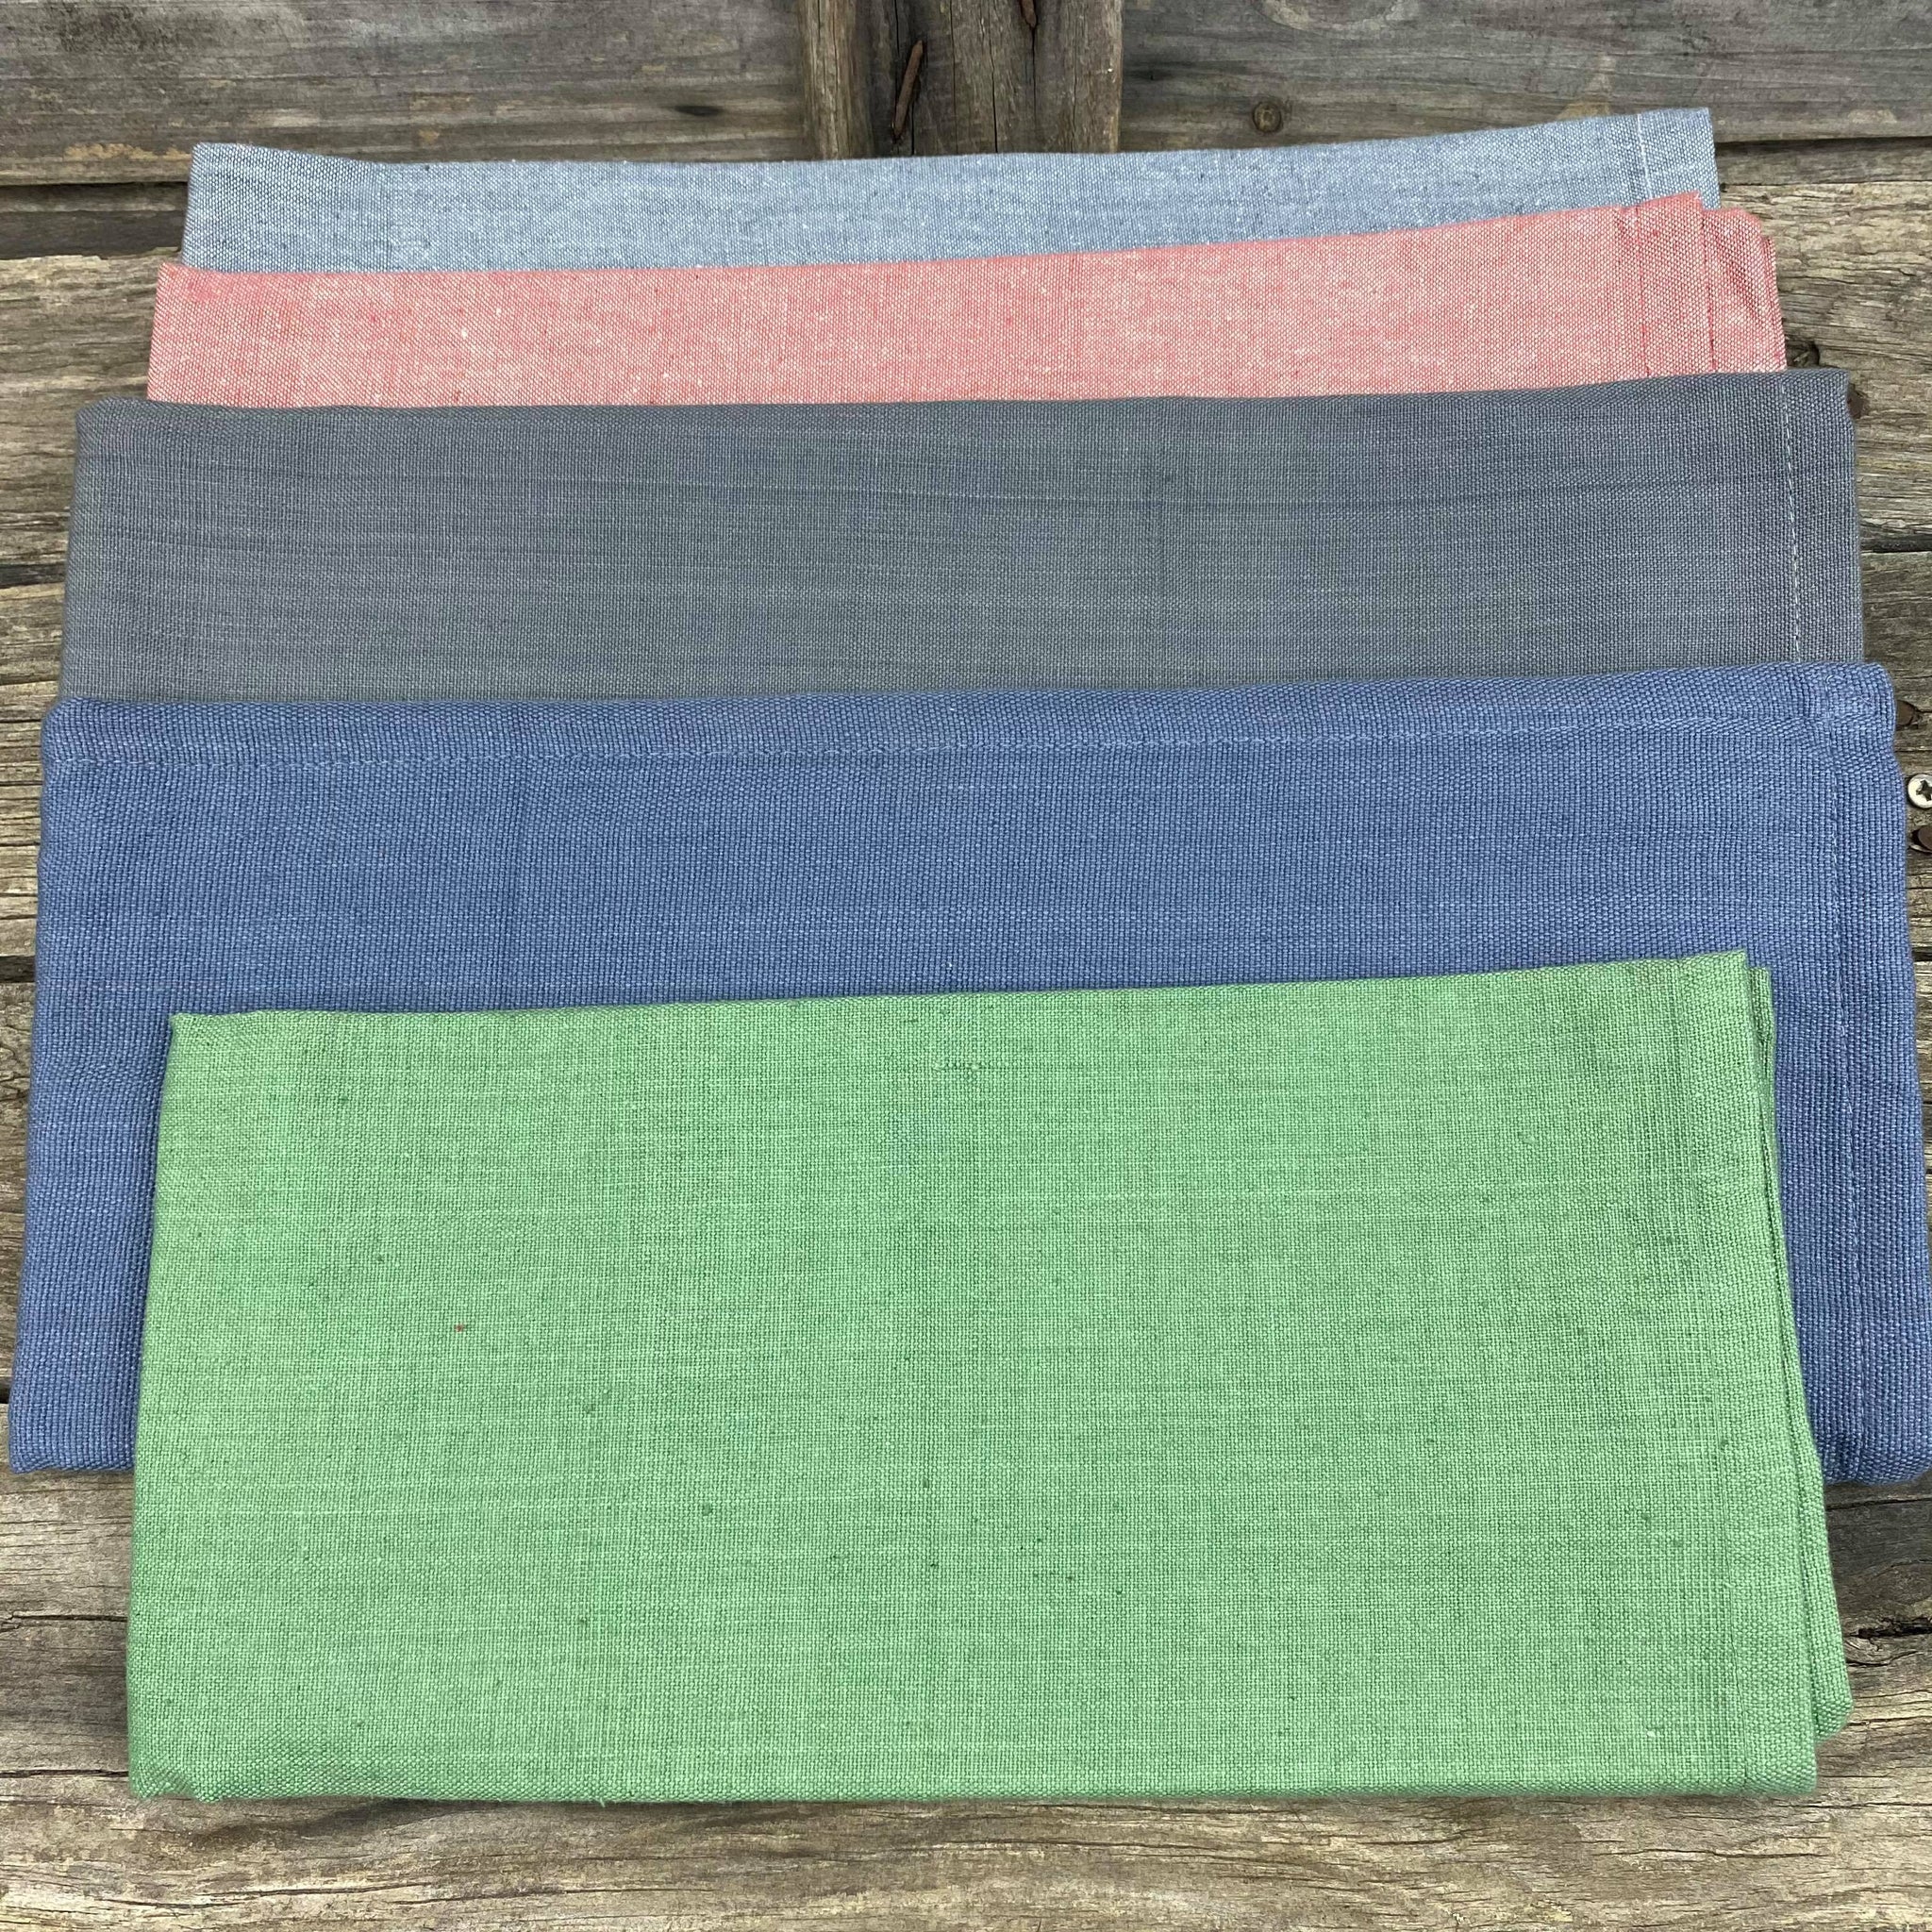 Fair trade ethical handwoven cotton tea towels in green, blue, ebony, pink and sky blue colours 